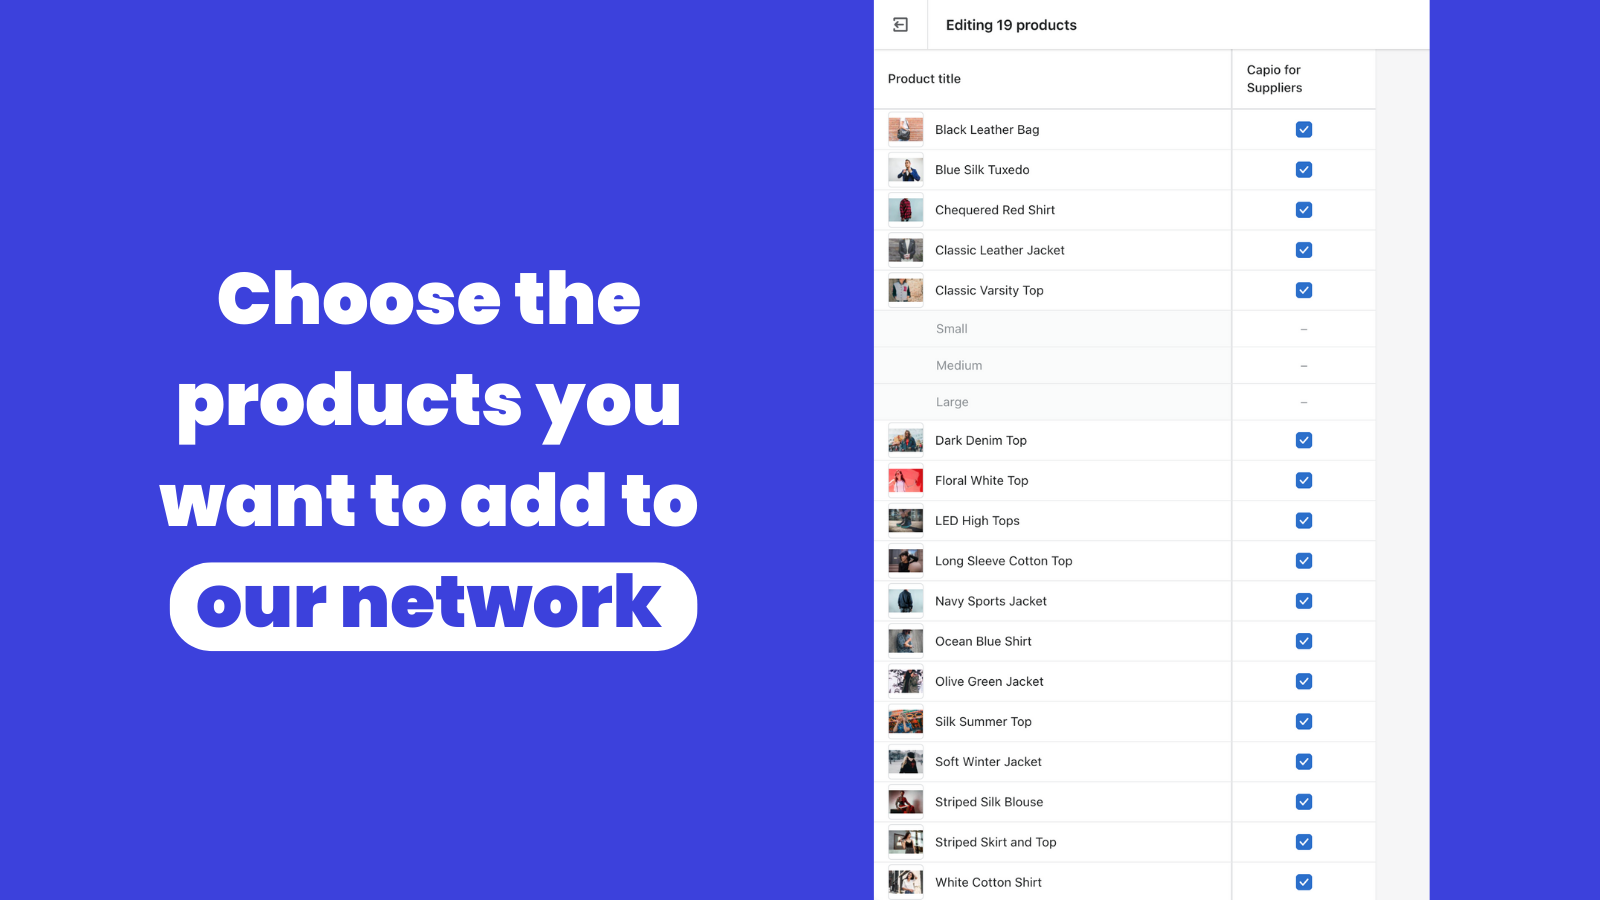 Choose the products you want to add to our network